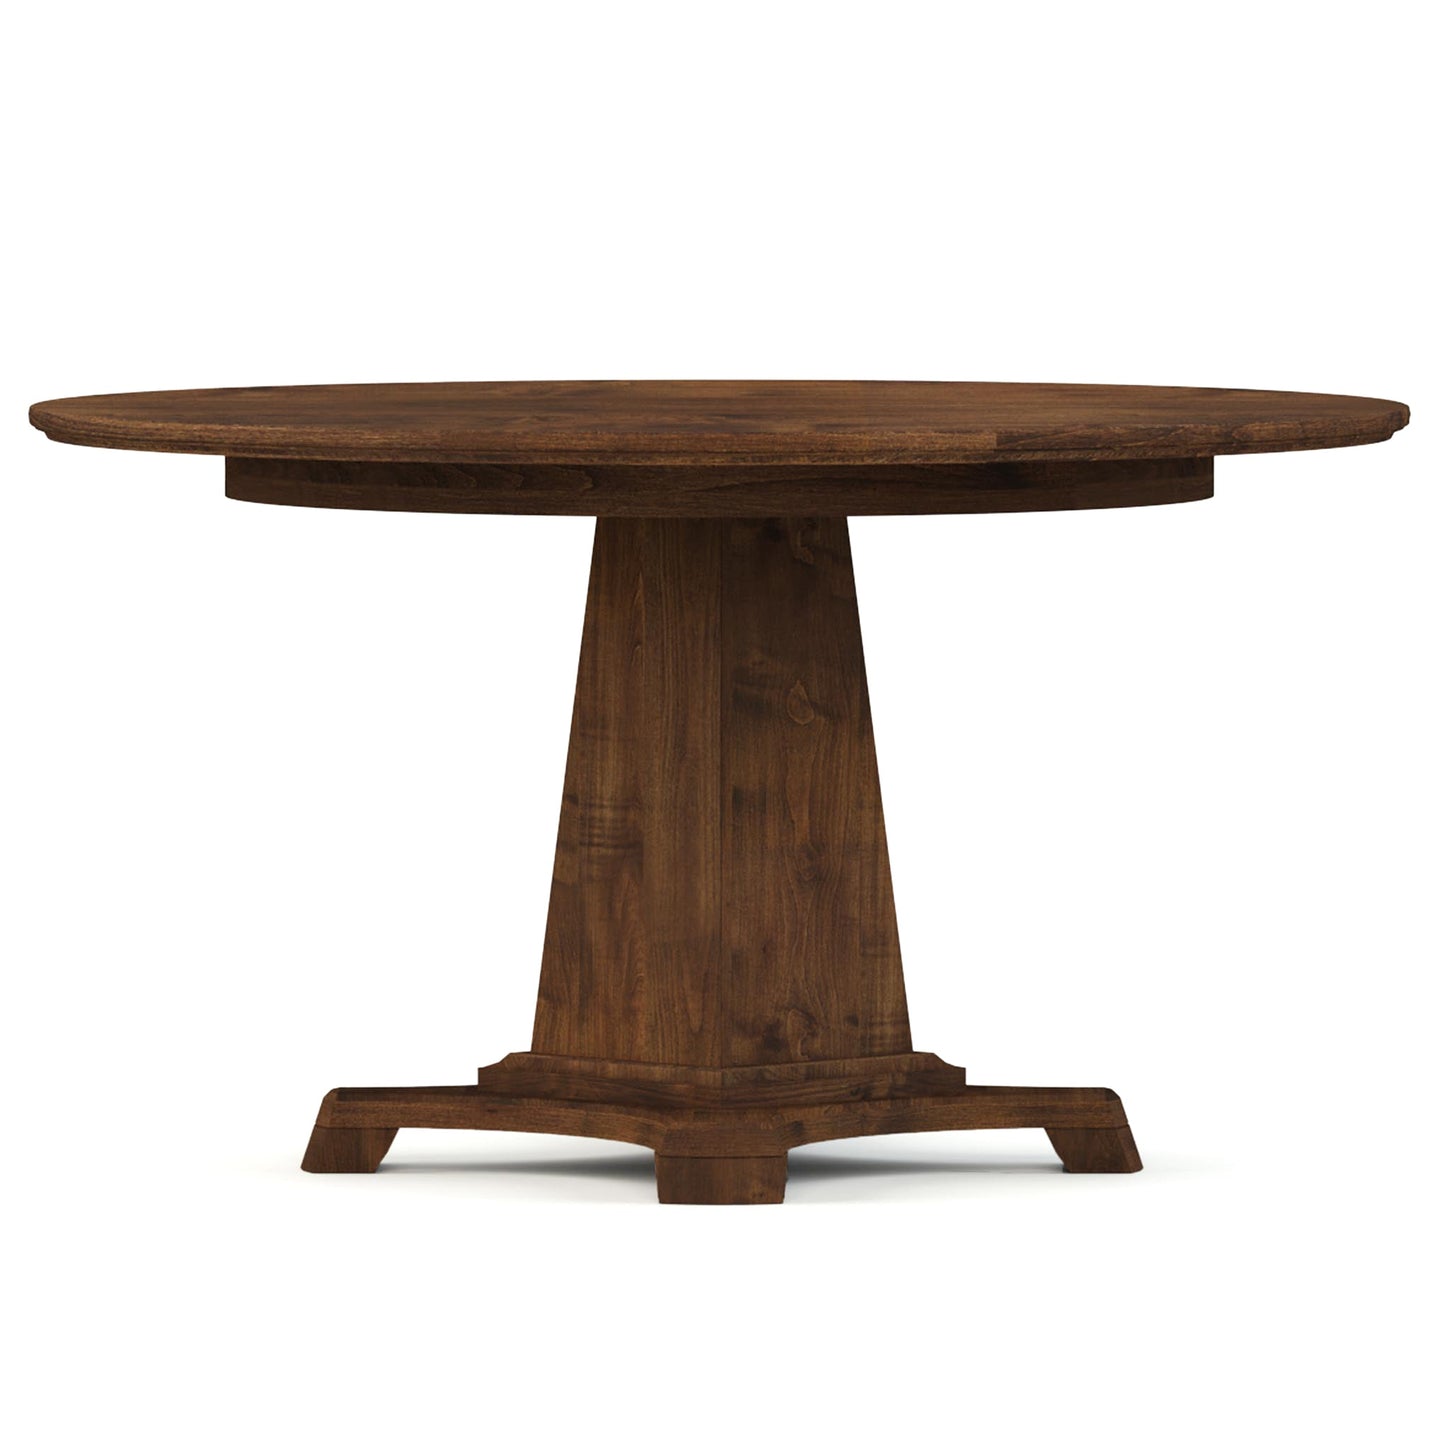 Revere 54-inch Round Dining Table